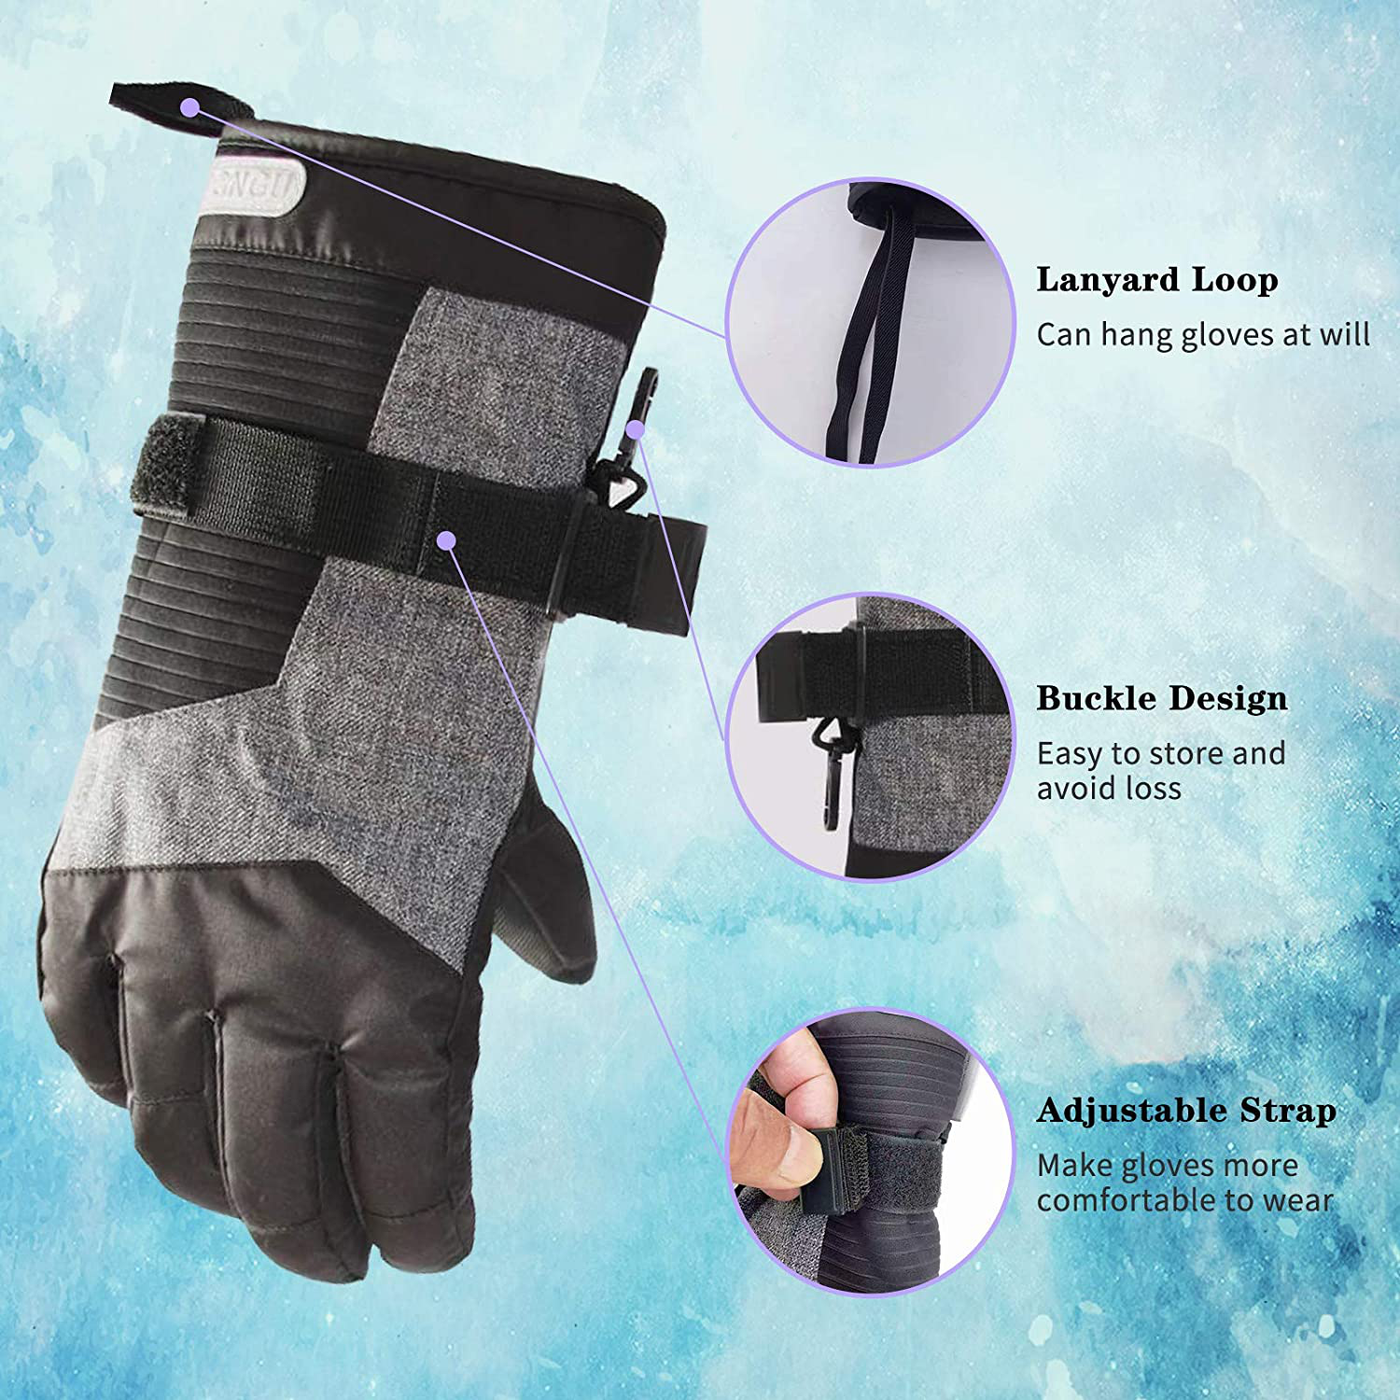 KOGNGU Ski Gloves Warm Snow Gloves Waterproof Insulated 3M Thermal Cotton for Cold Weather Suitable for Men and Women